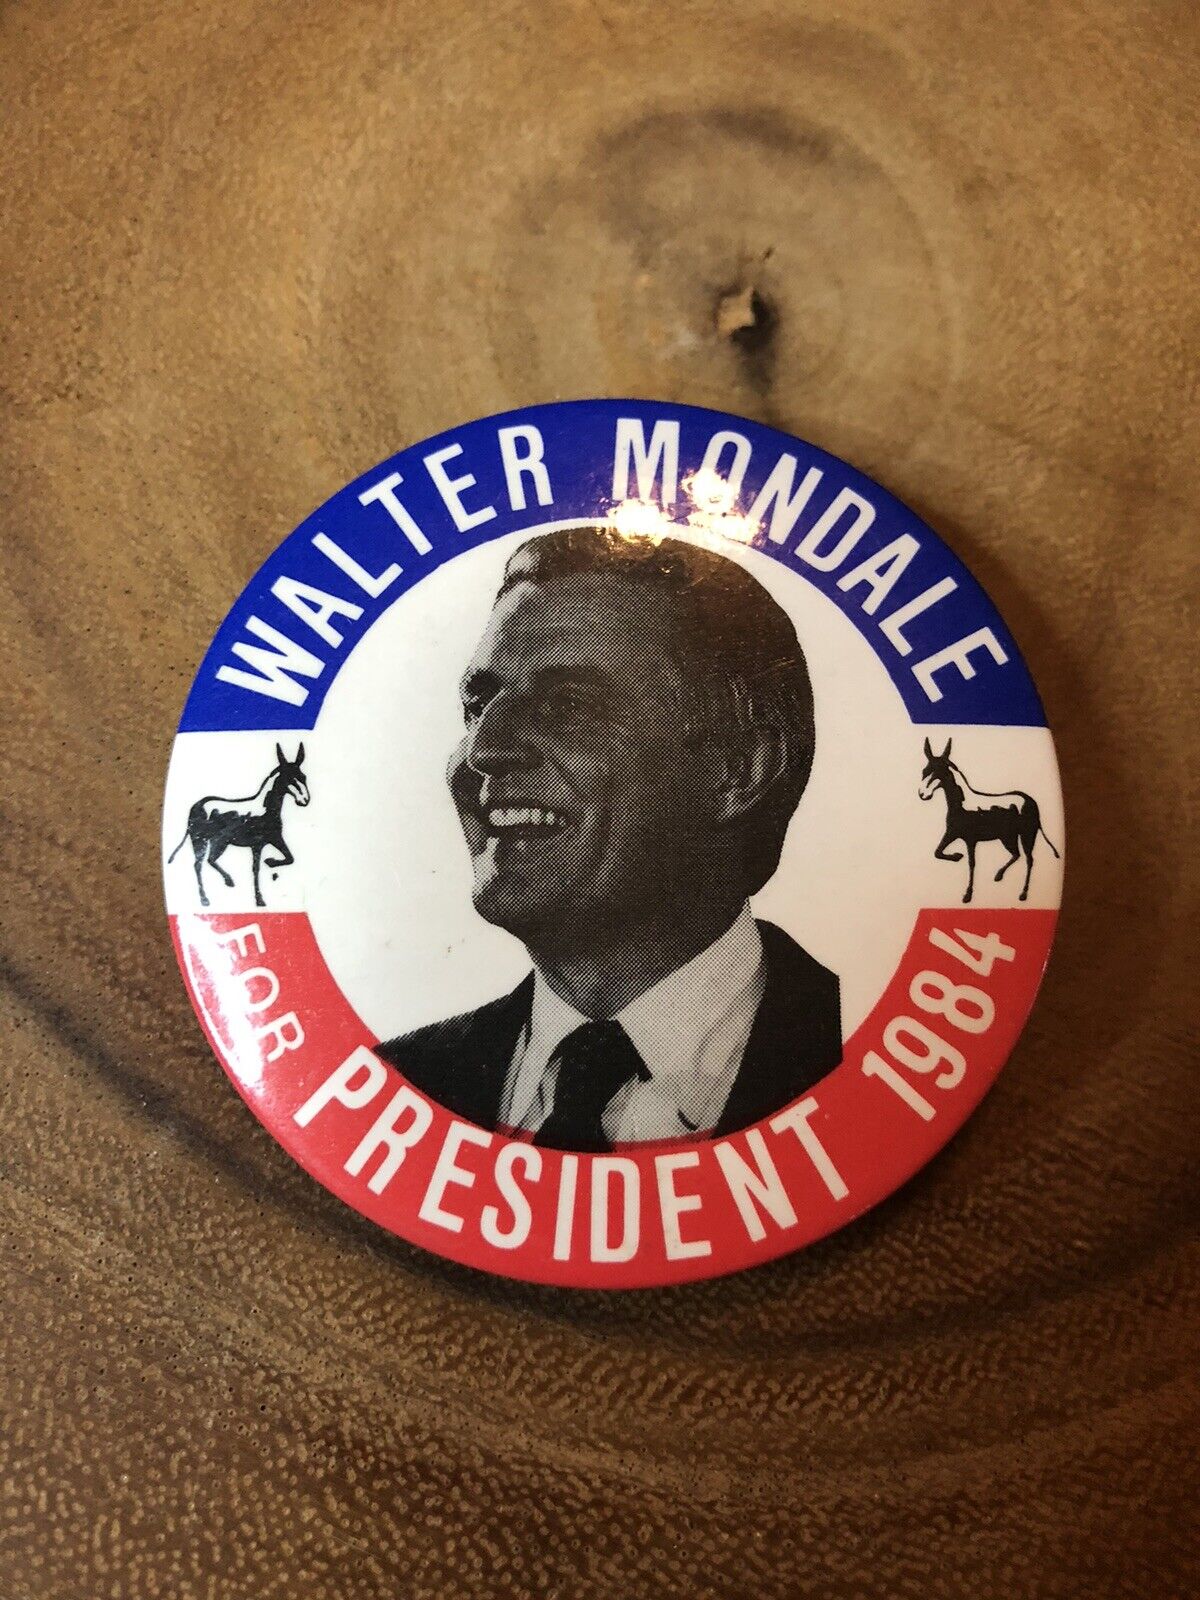 2-1/4” 1984 Walter Mondale for President political campaign pin Pin-back button